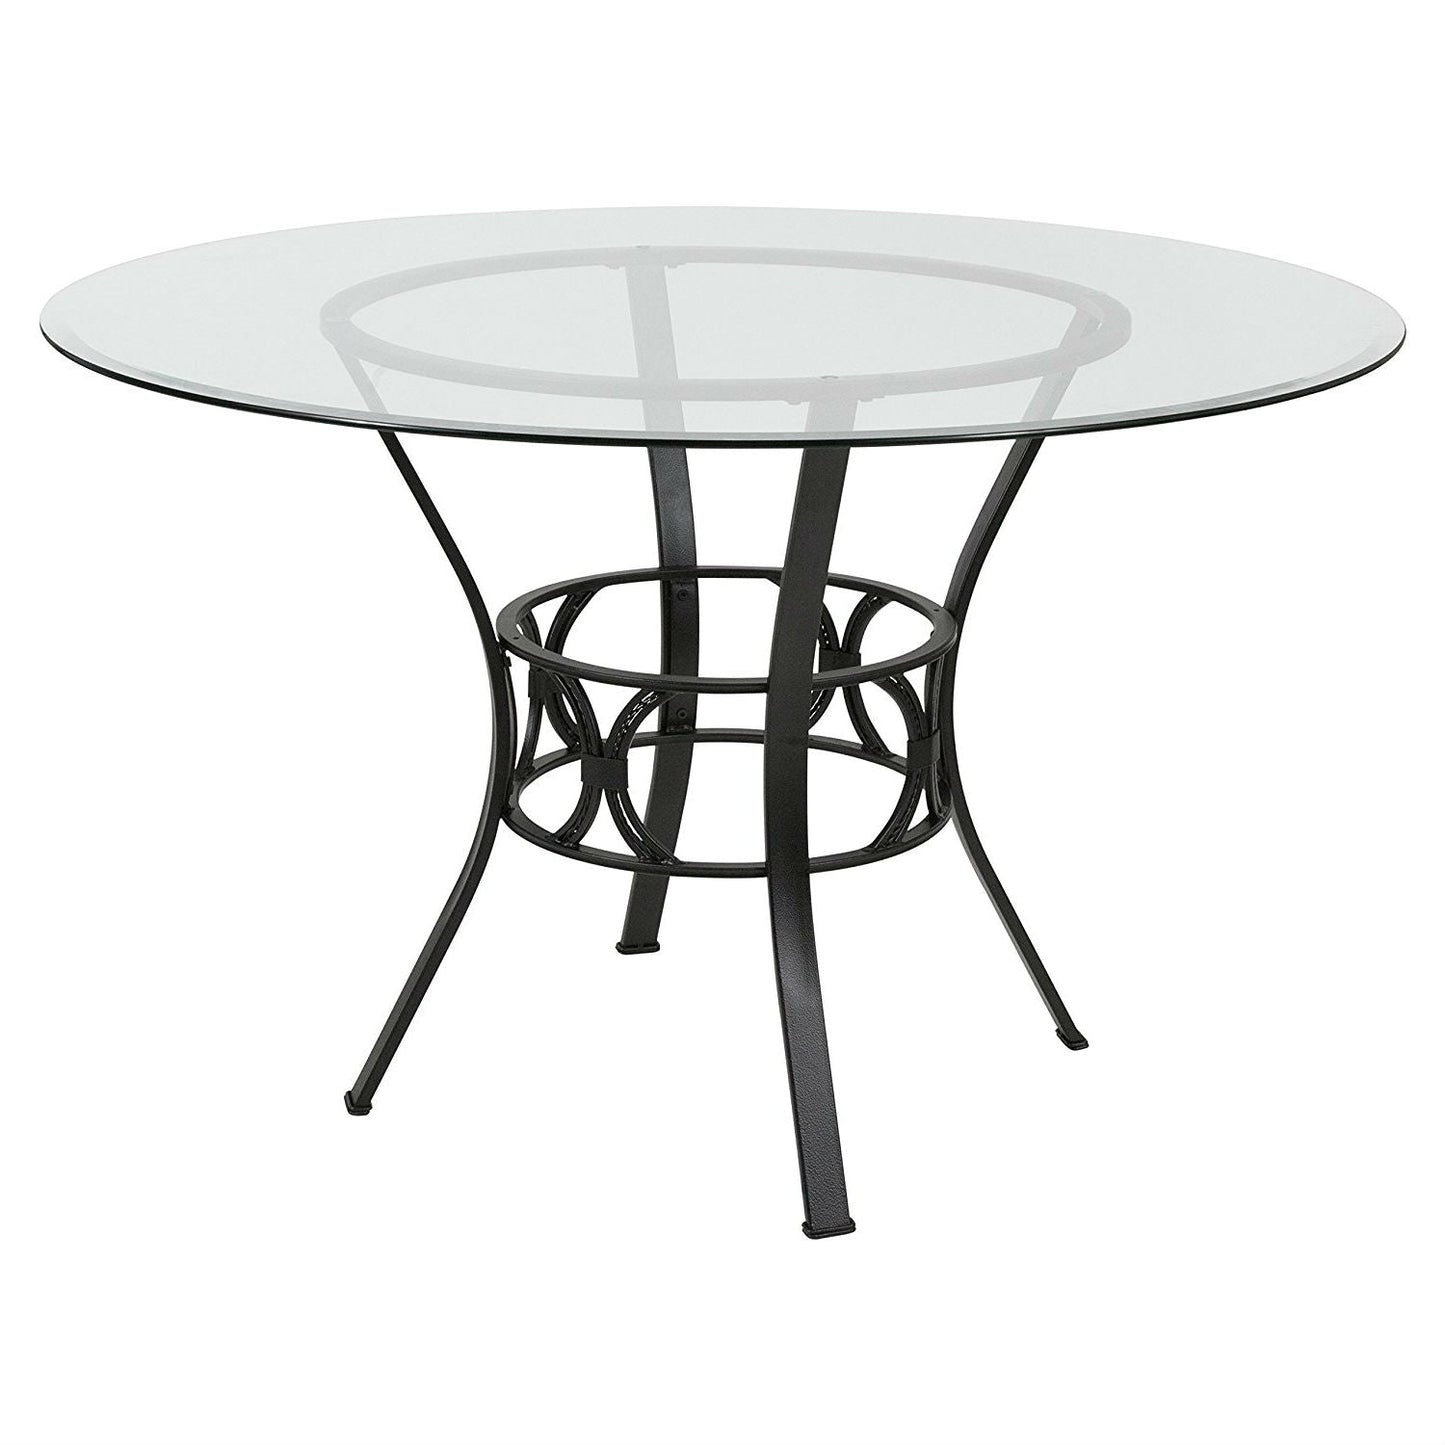 Dining > Dining Tables - Round 48-inch Clear Glass Dining Table With Black Metal Frame